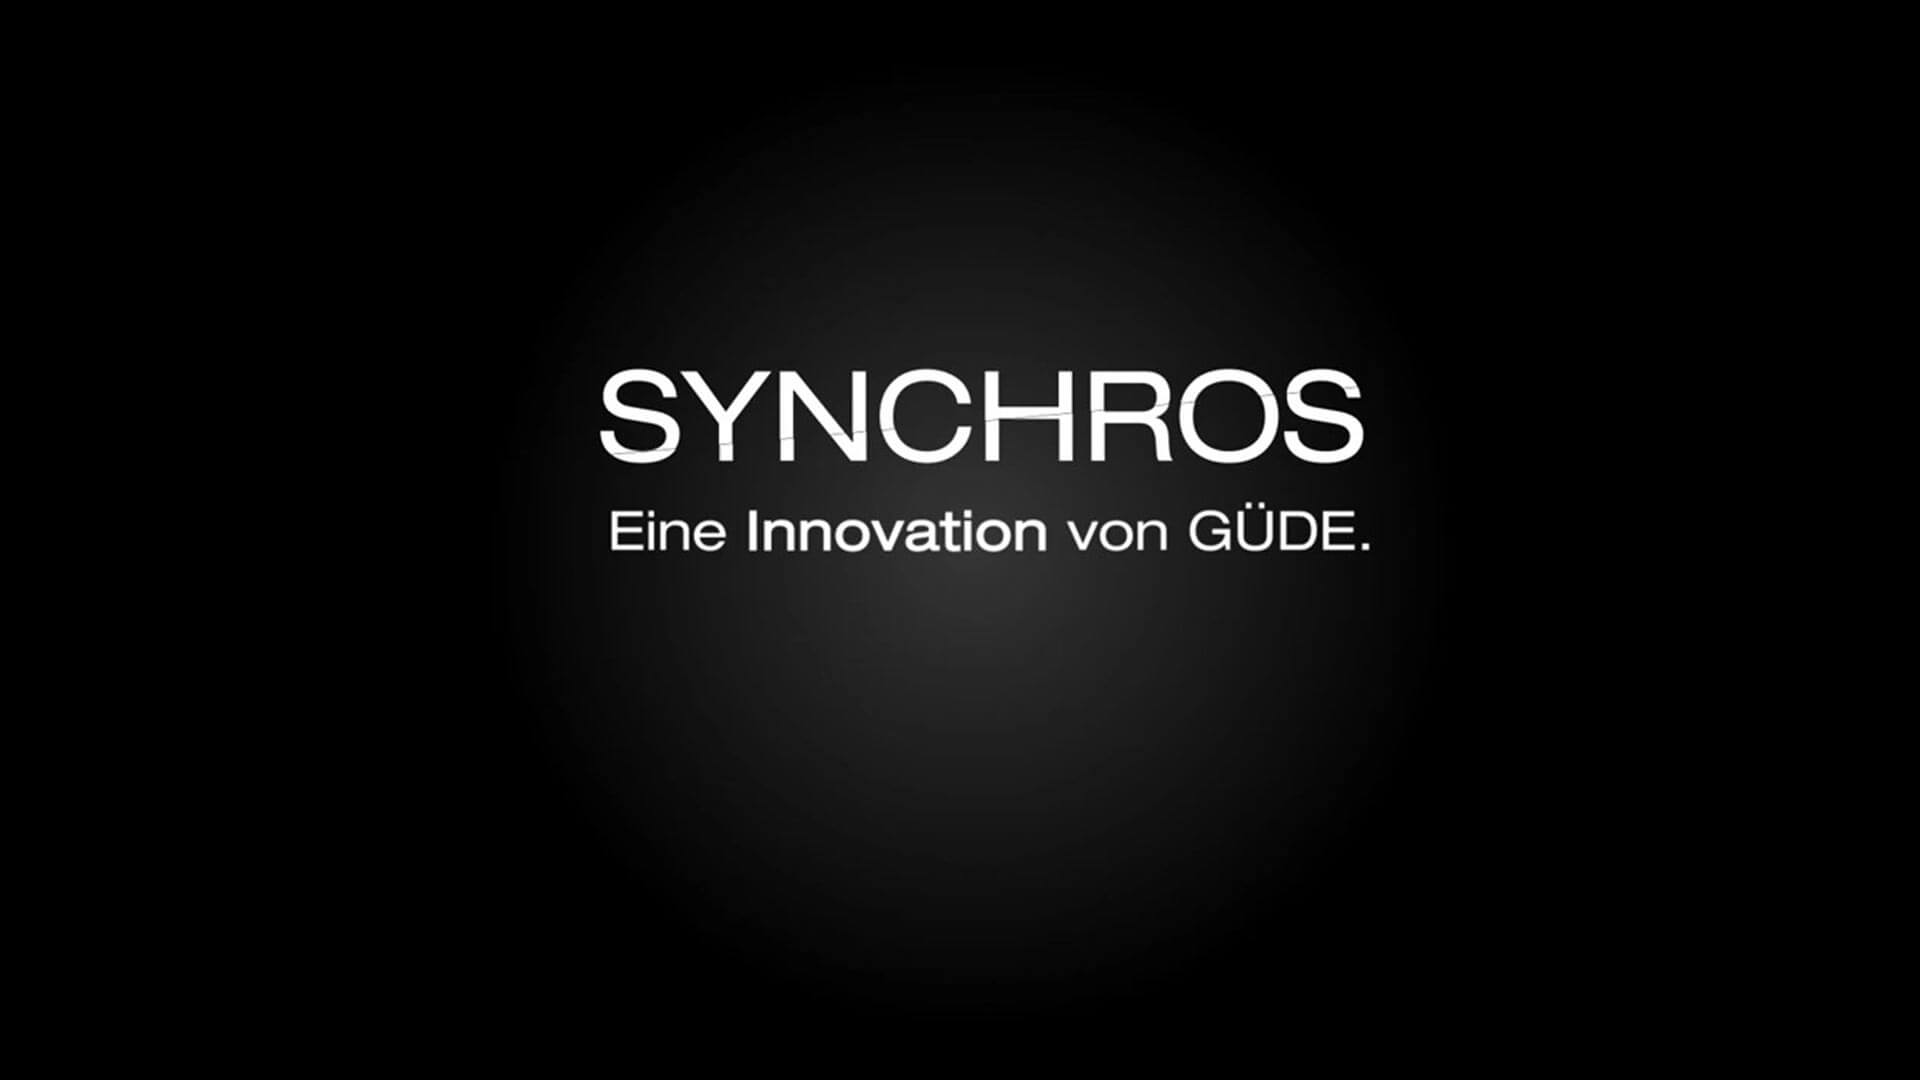 guede-synchros-video-image-chef-knife